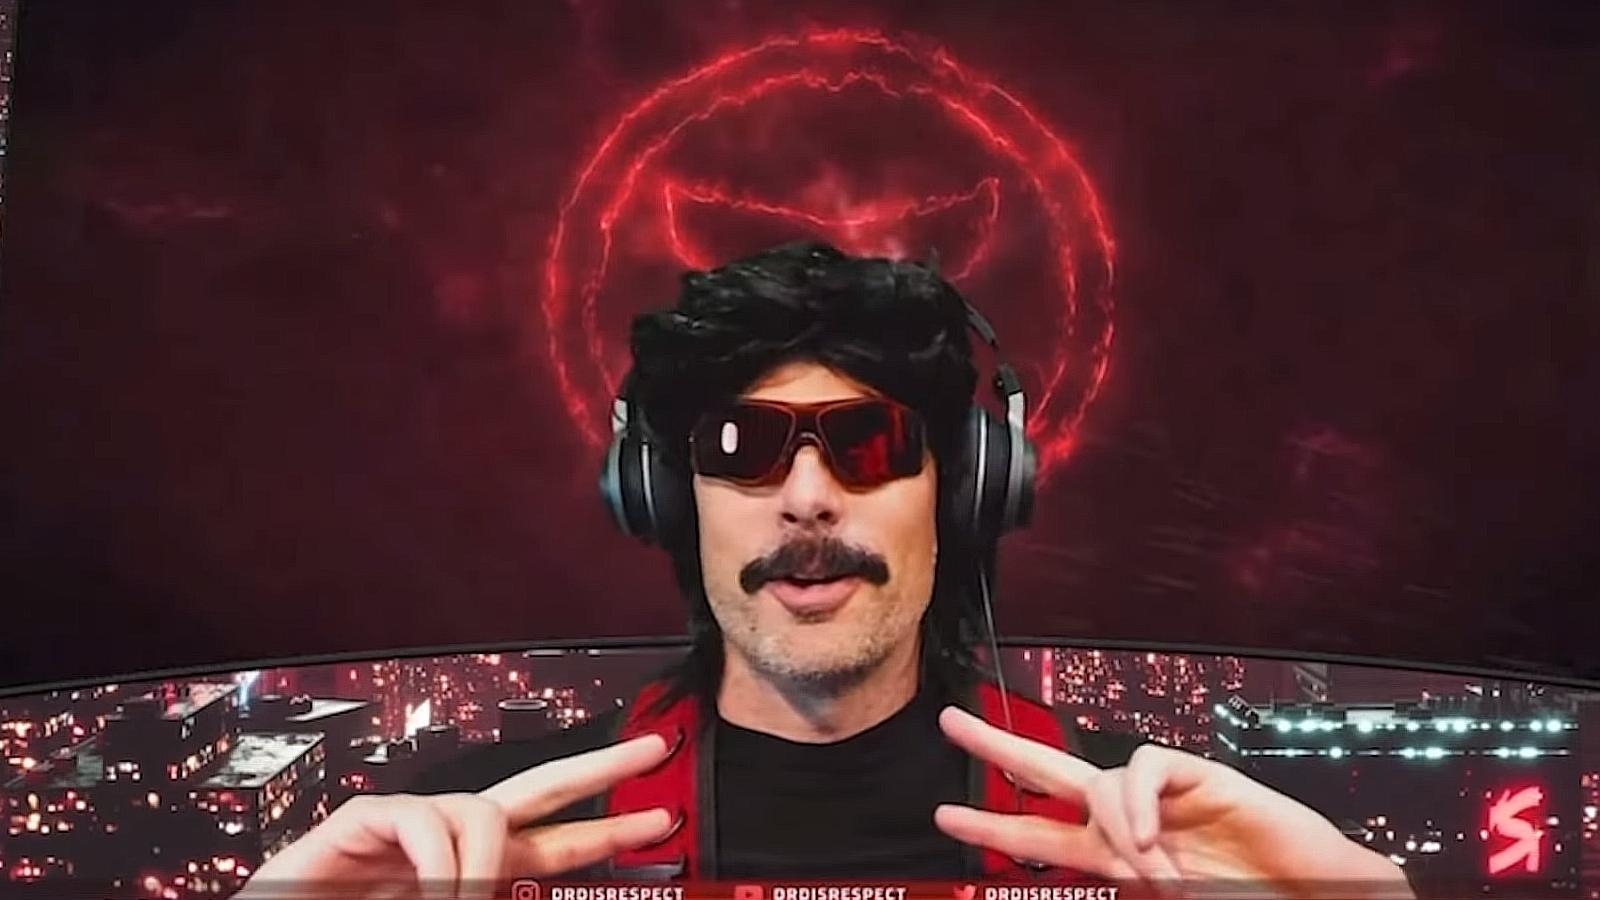 Dr Disrespect during his livestream, adressing Hassan's comments.